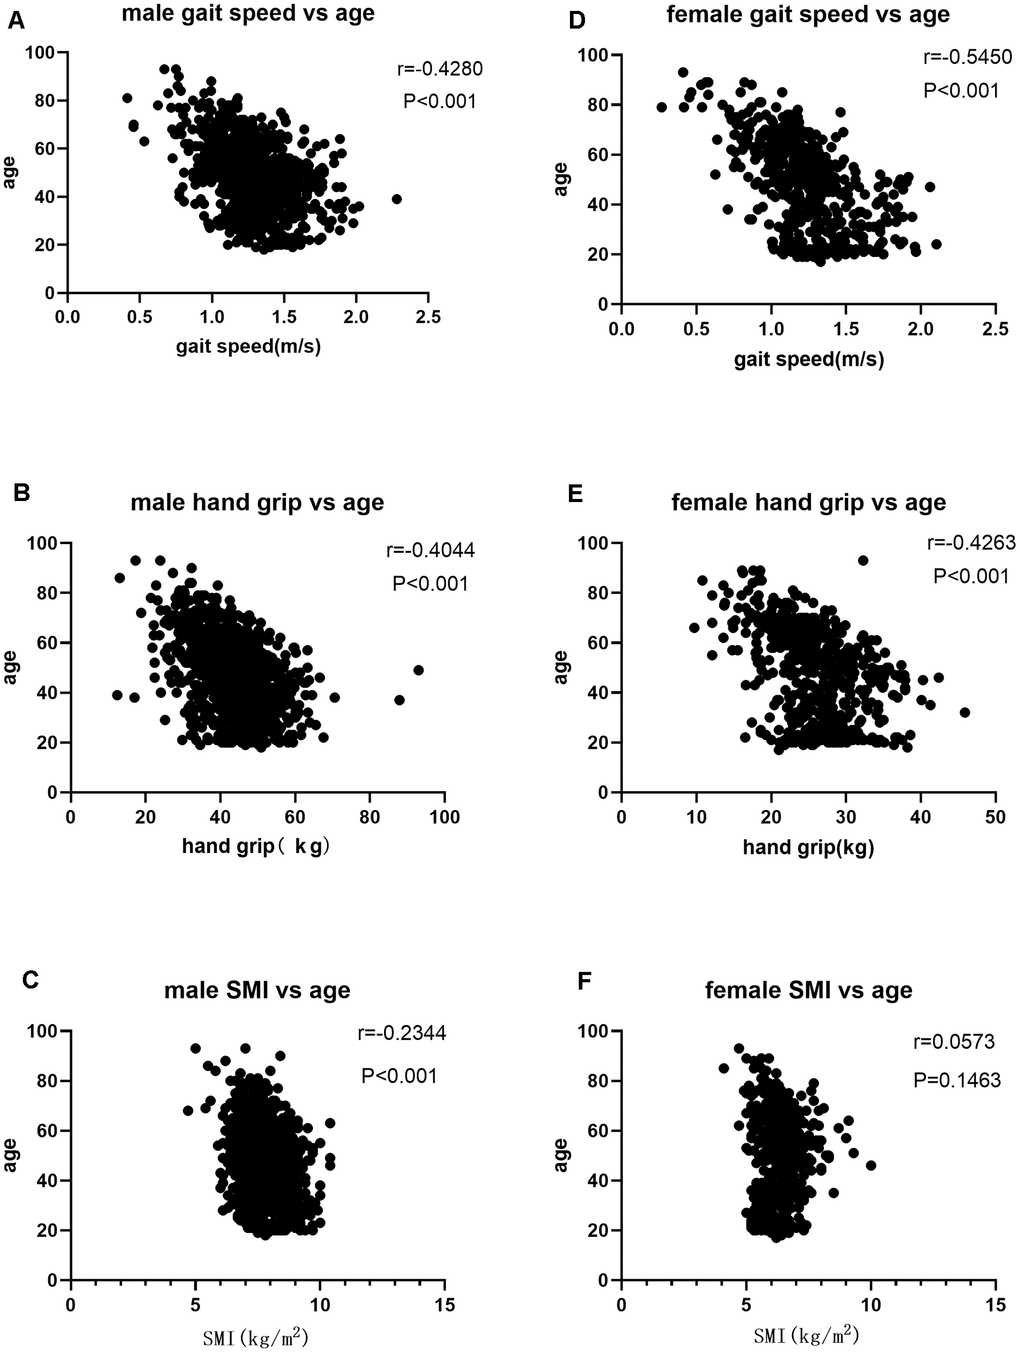 (A) Correlation analysis of gait speed and age in males; (B) Correlation analysis of hand grip and age n males; (C) Correlation analysis of SMI and age in males; (D) Correlation analysis of gait speed and age in females; (E) Correlation analysis of hand grip and age in females; (F) Correlation analysis of SMI and age in females.